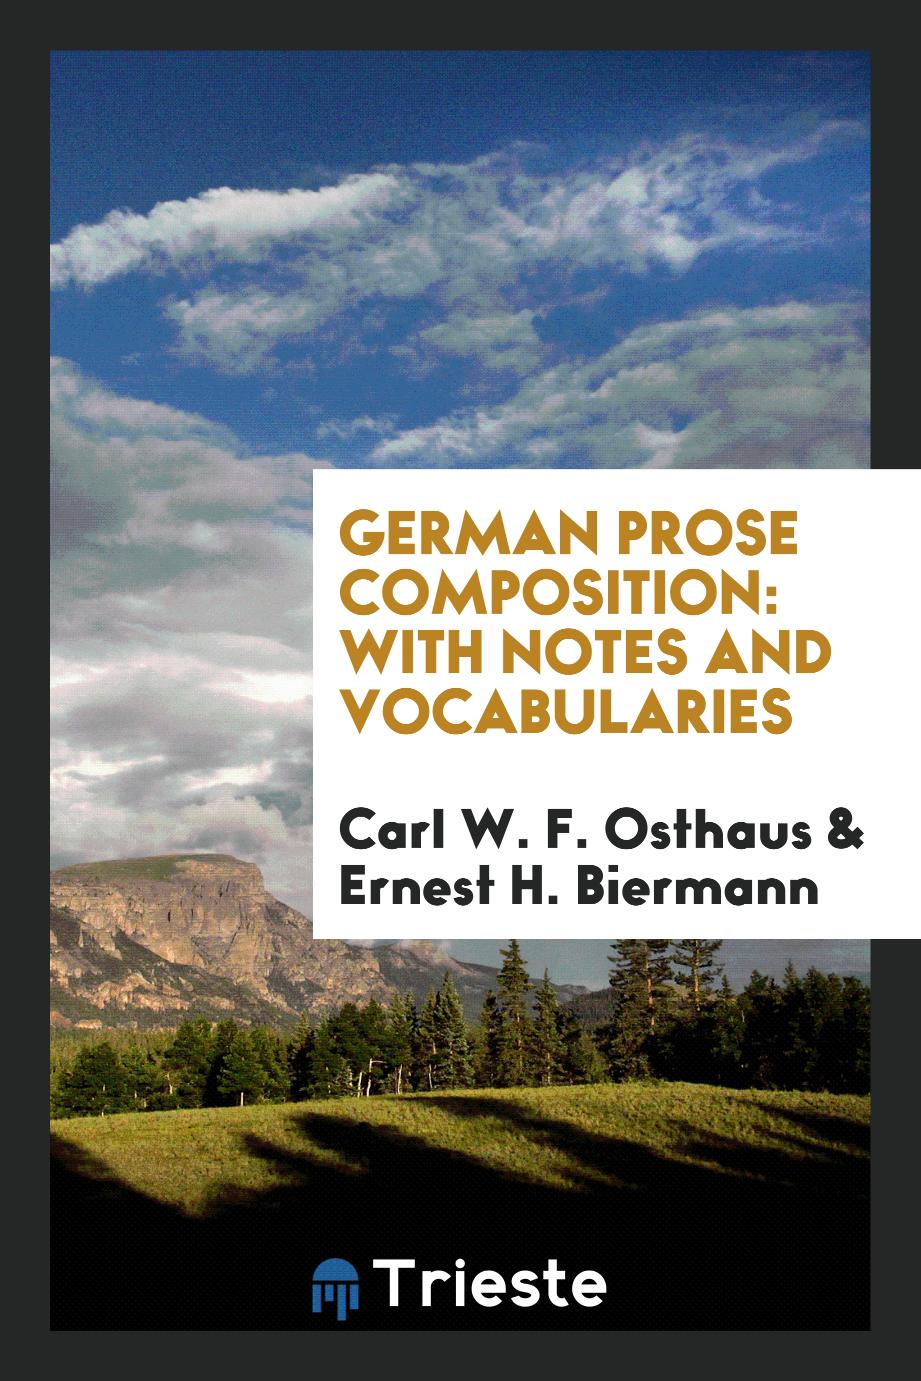 German prose composition: with notes and vocabularies